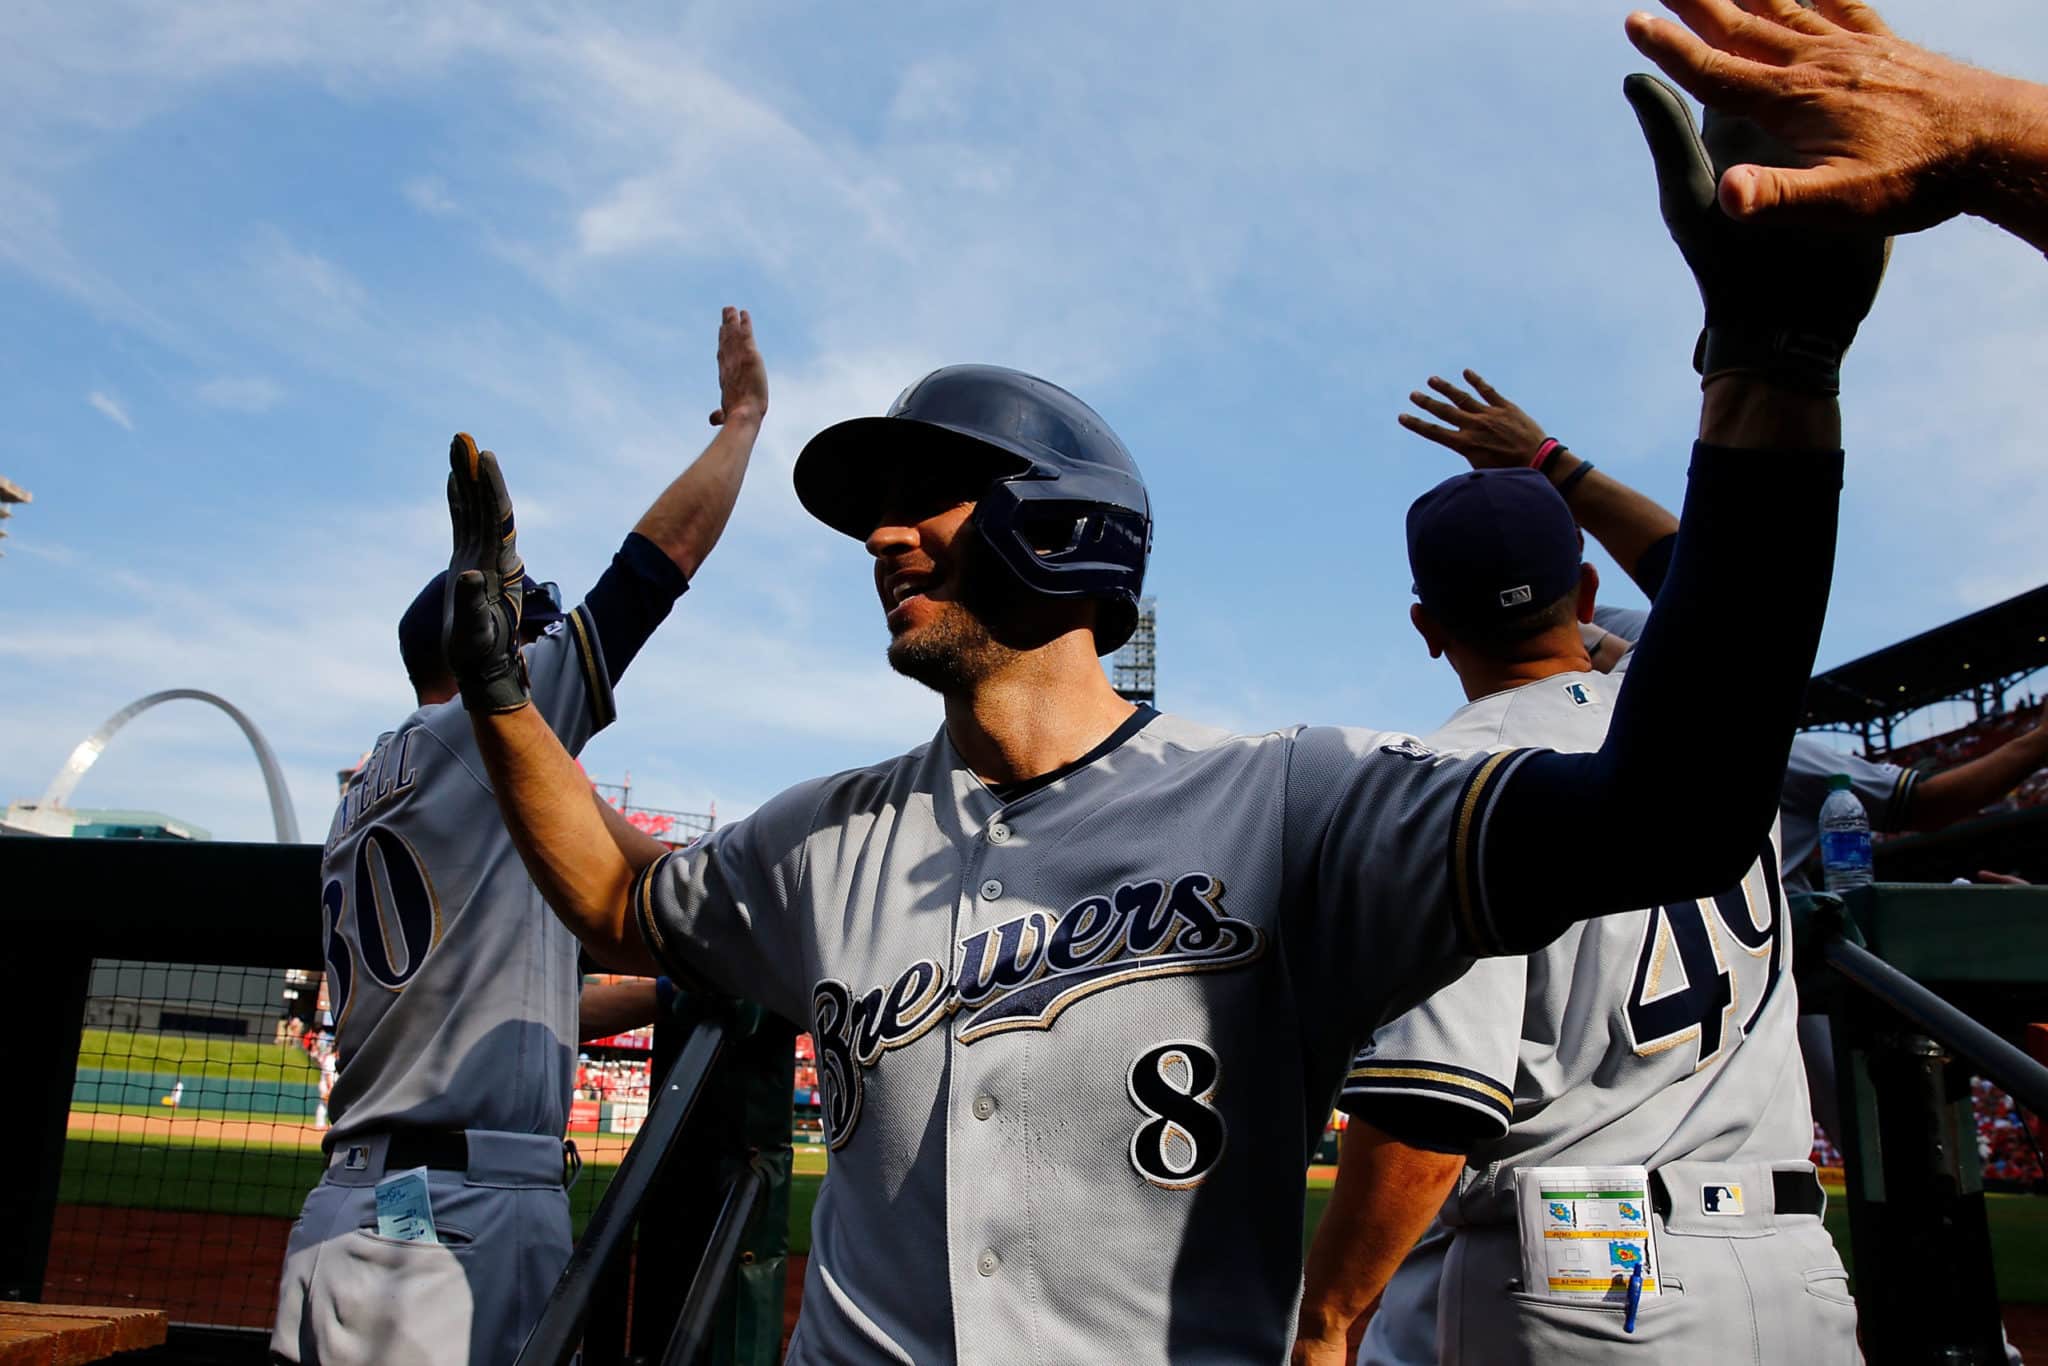 Ryan Braun officially retires after 14 years with the Milwaukee Brewers